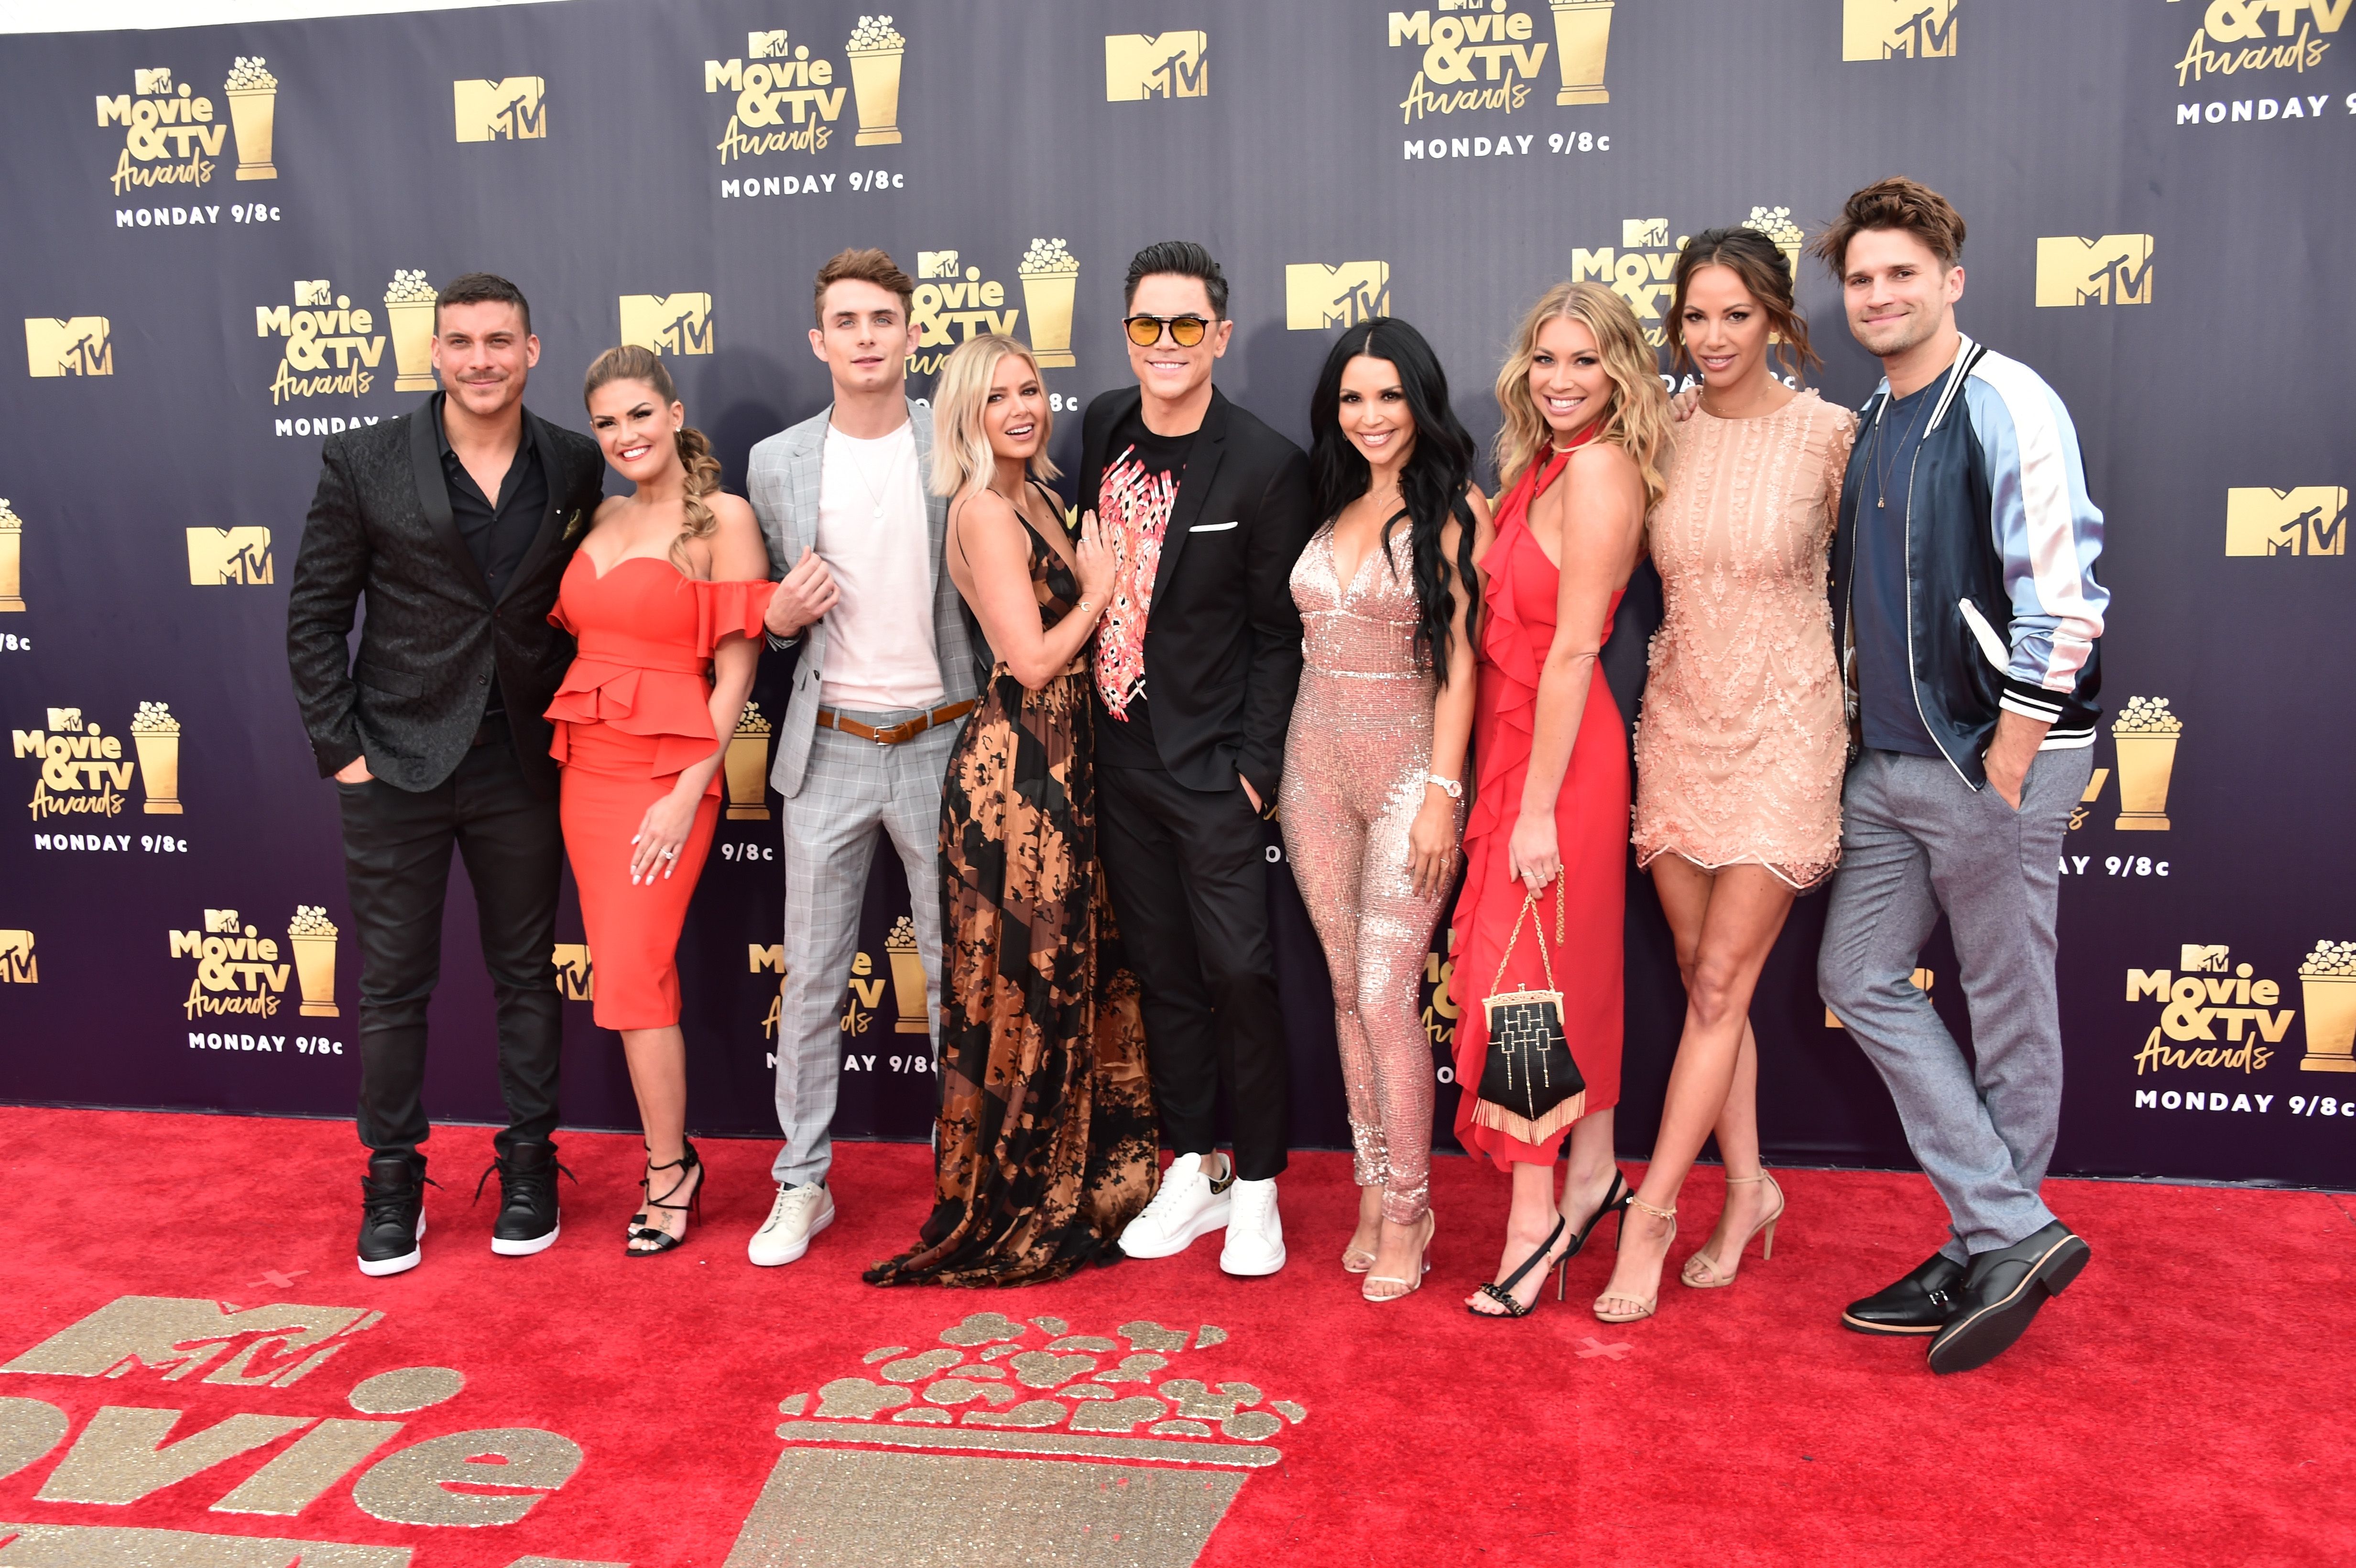 The 'Vanderpump Rules' cast wears dresses and suits on the red carpet.